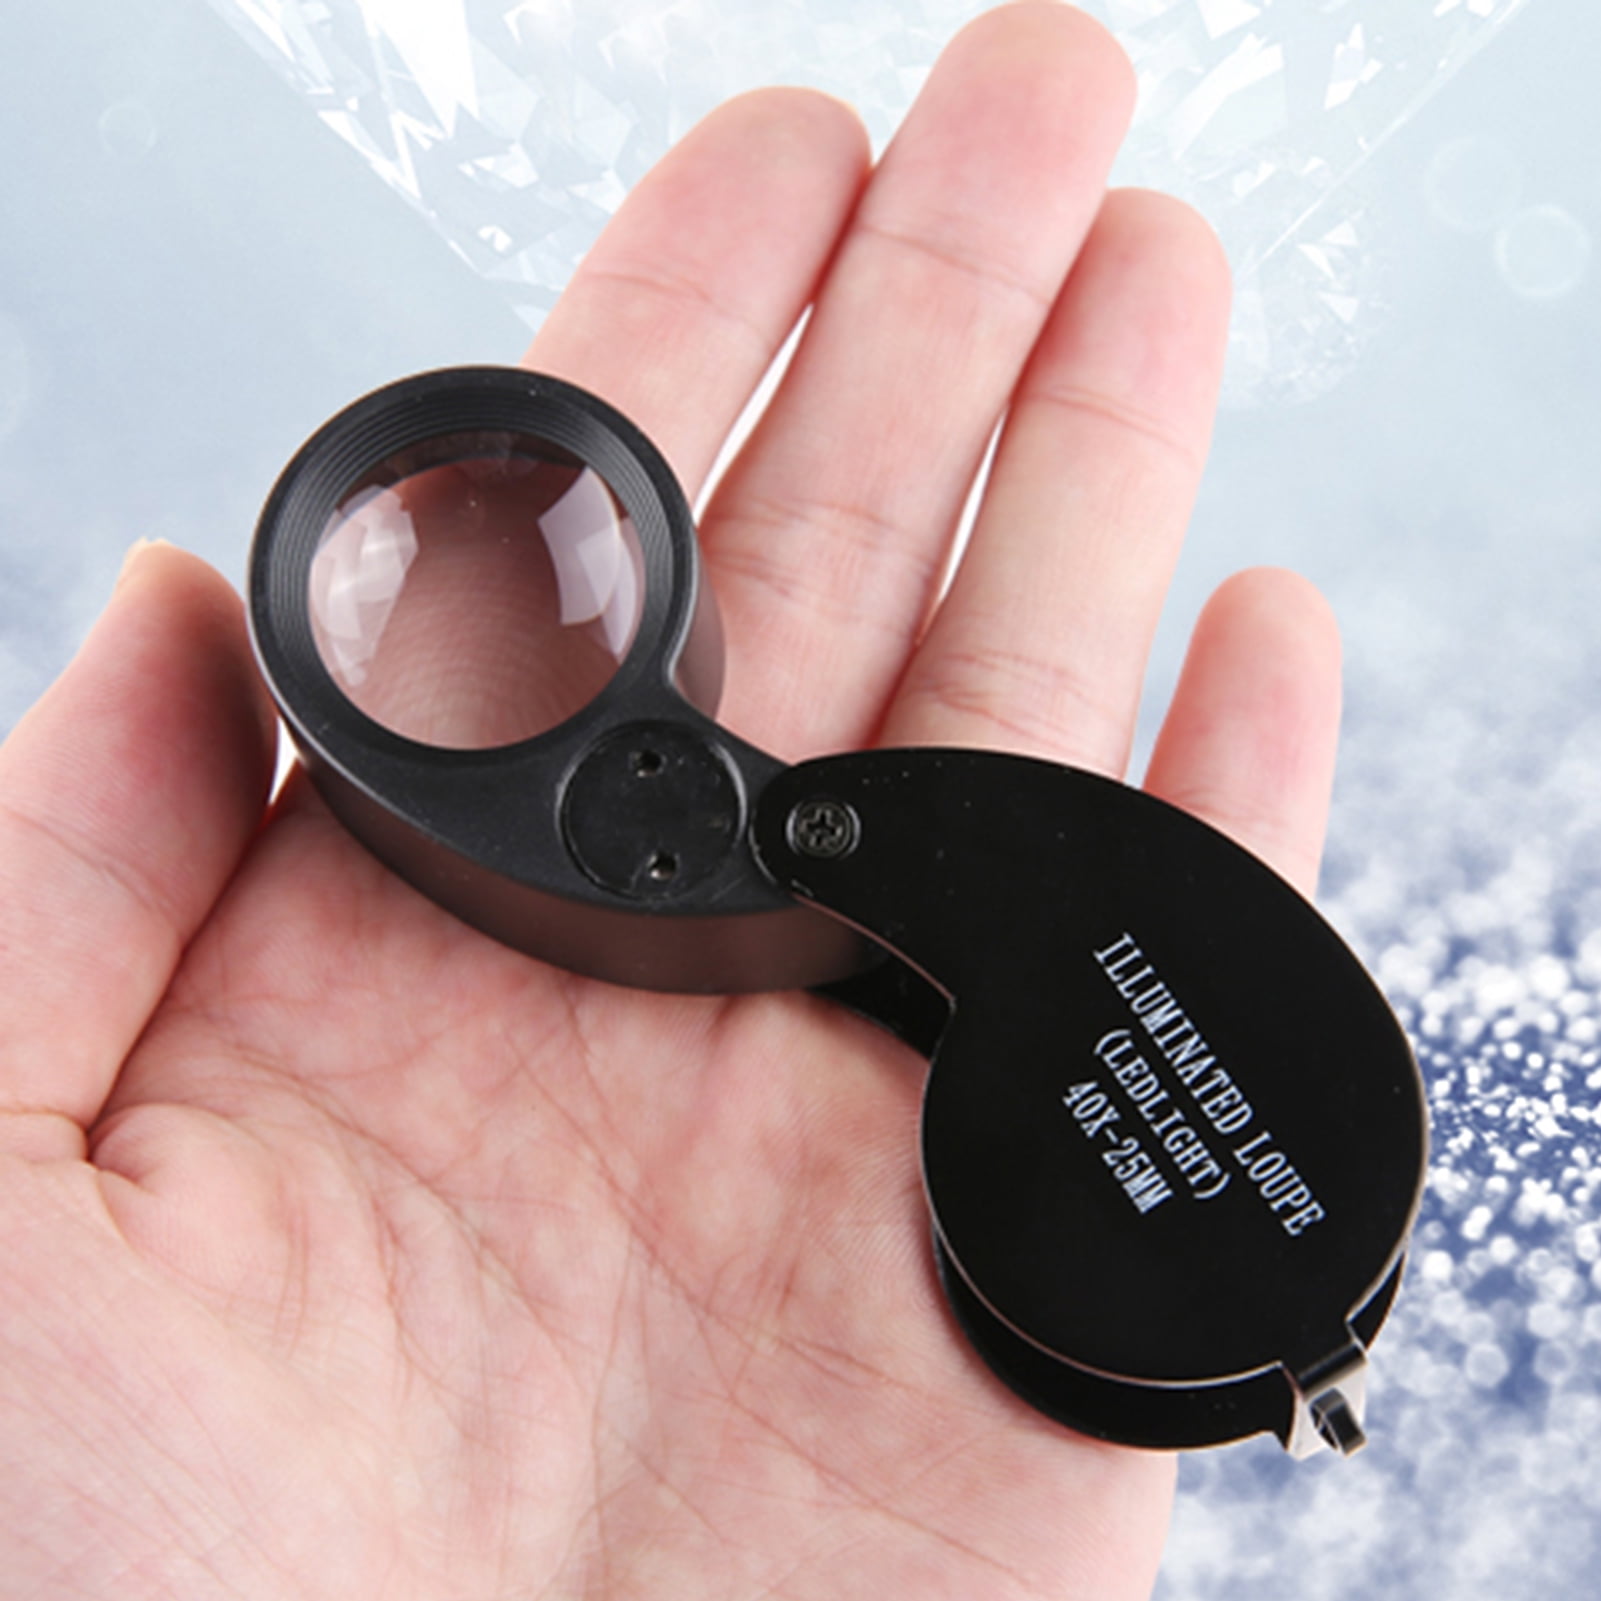 Porfeet 40X LED Magnifier Loupe Illuminated Lighting Jewelry Coin Stamp  Identification(Silver)